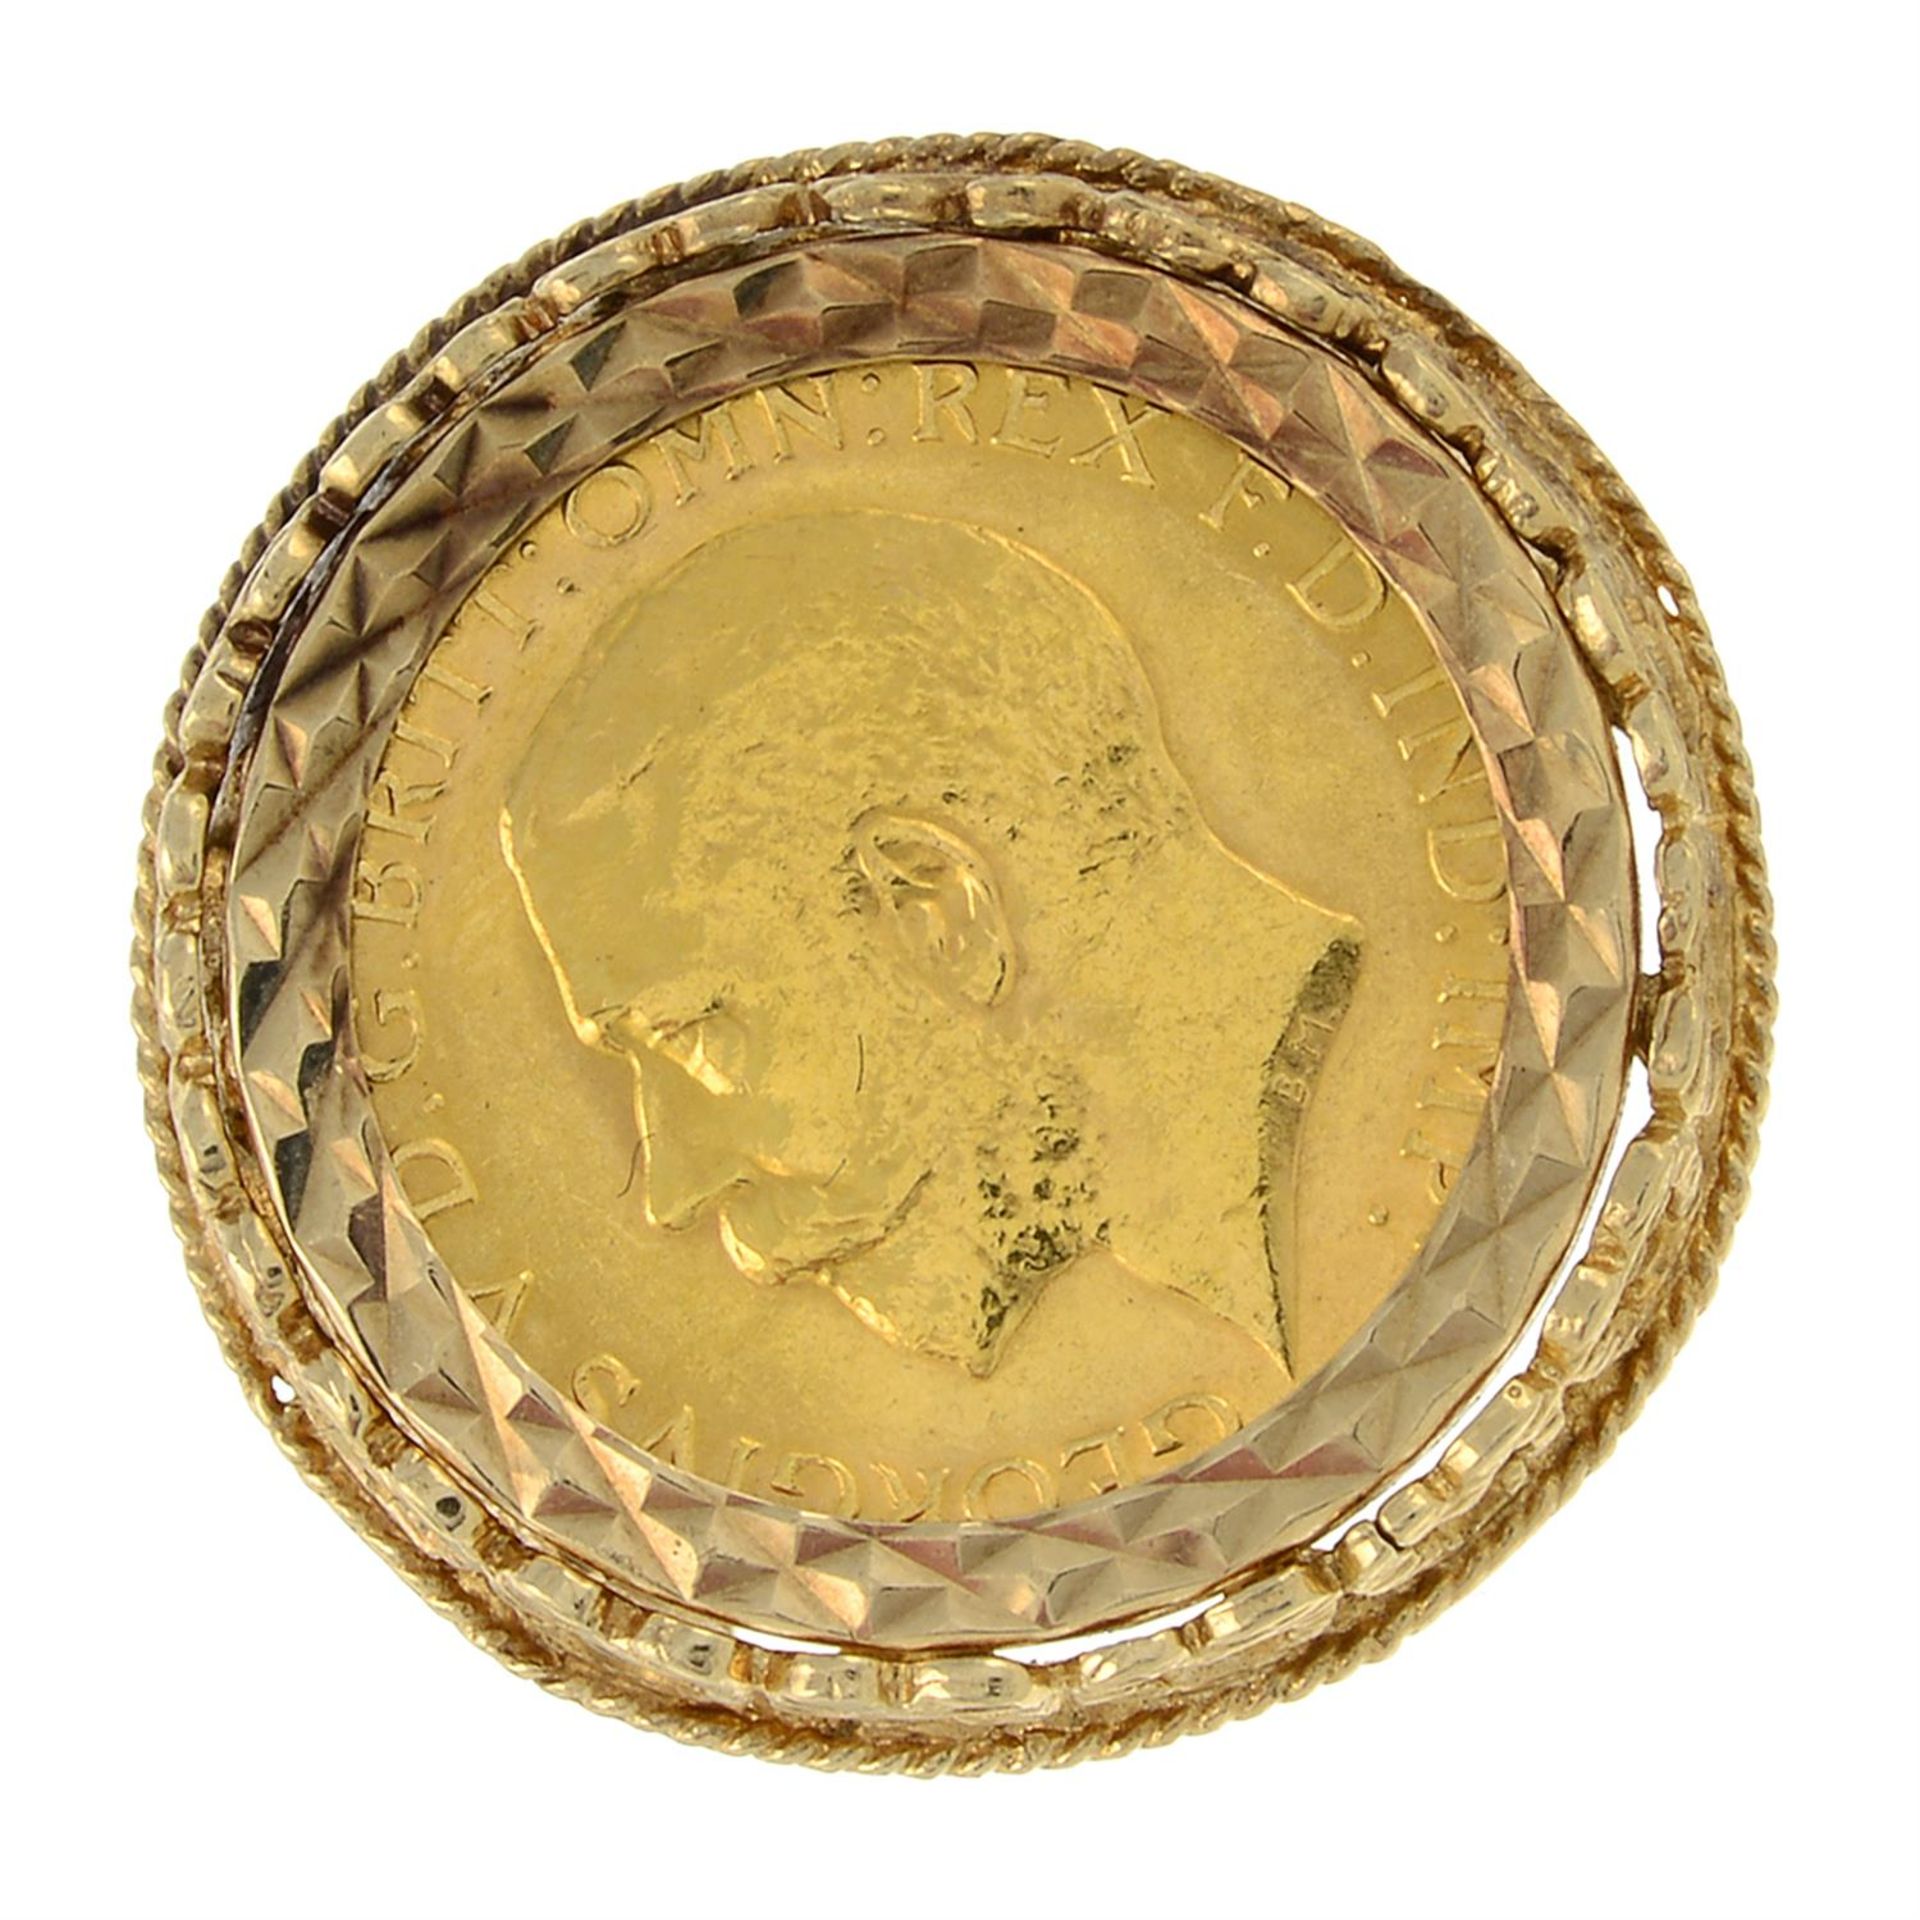 A half sovereign ring, within a 9ct gold mount.